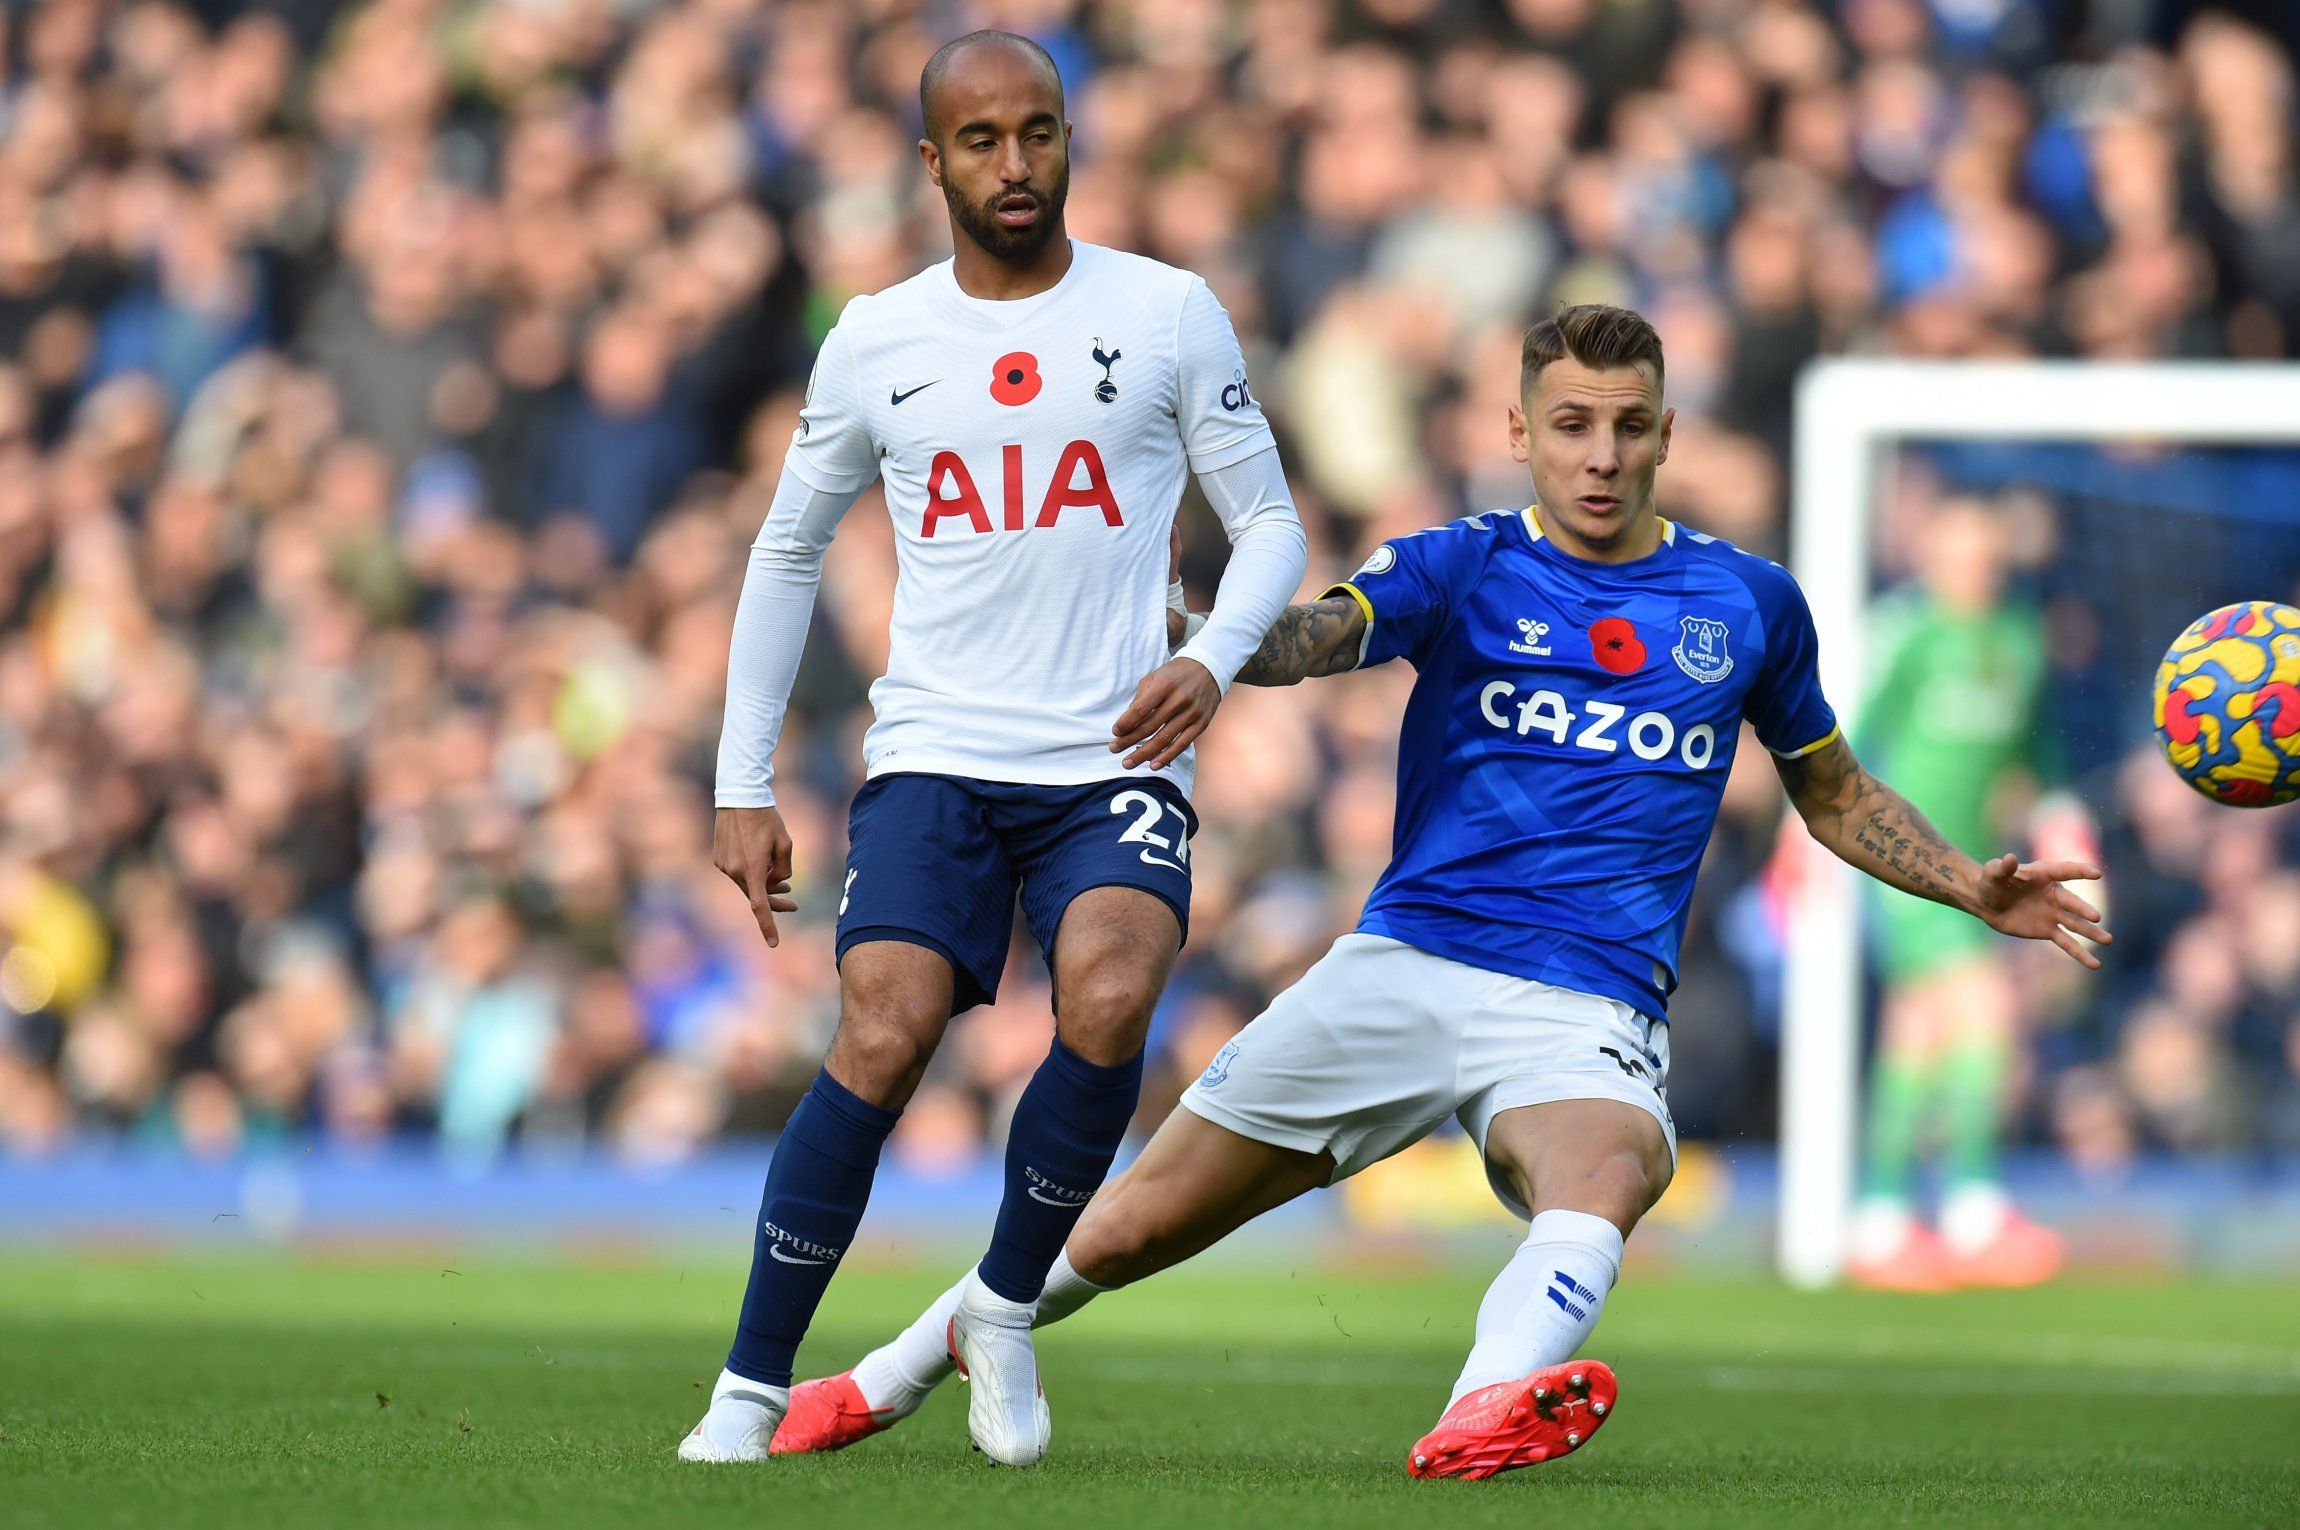 Spurs winger Lucas Moura in action against Everton in the Premier League